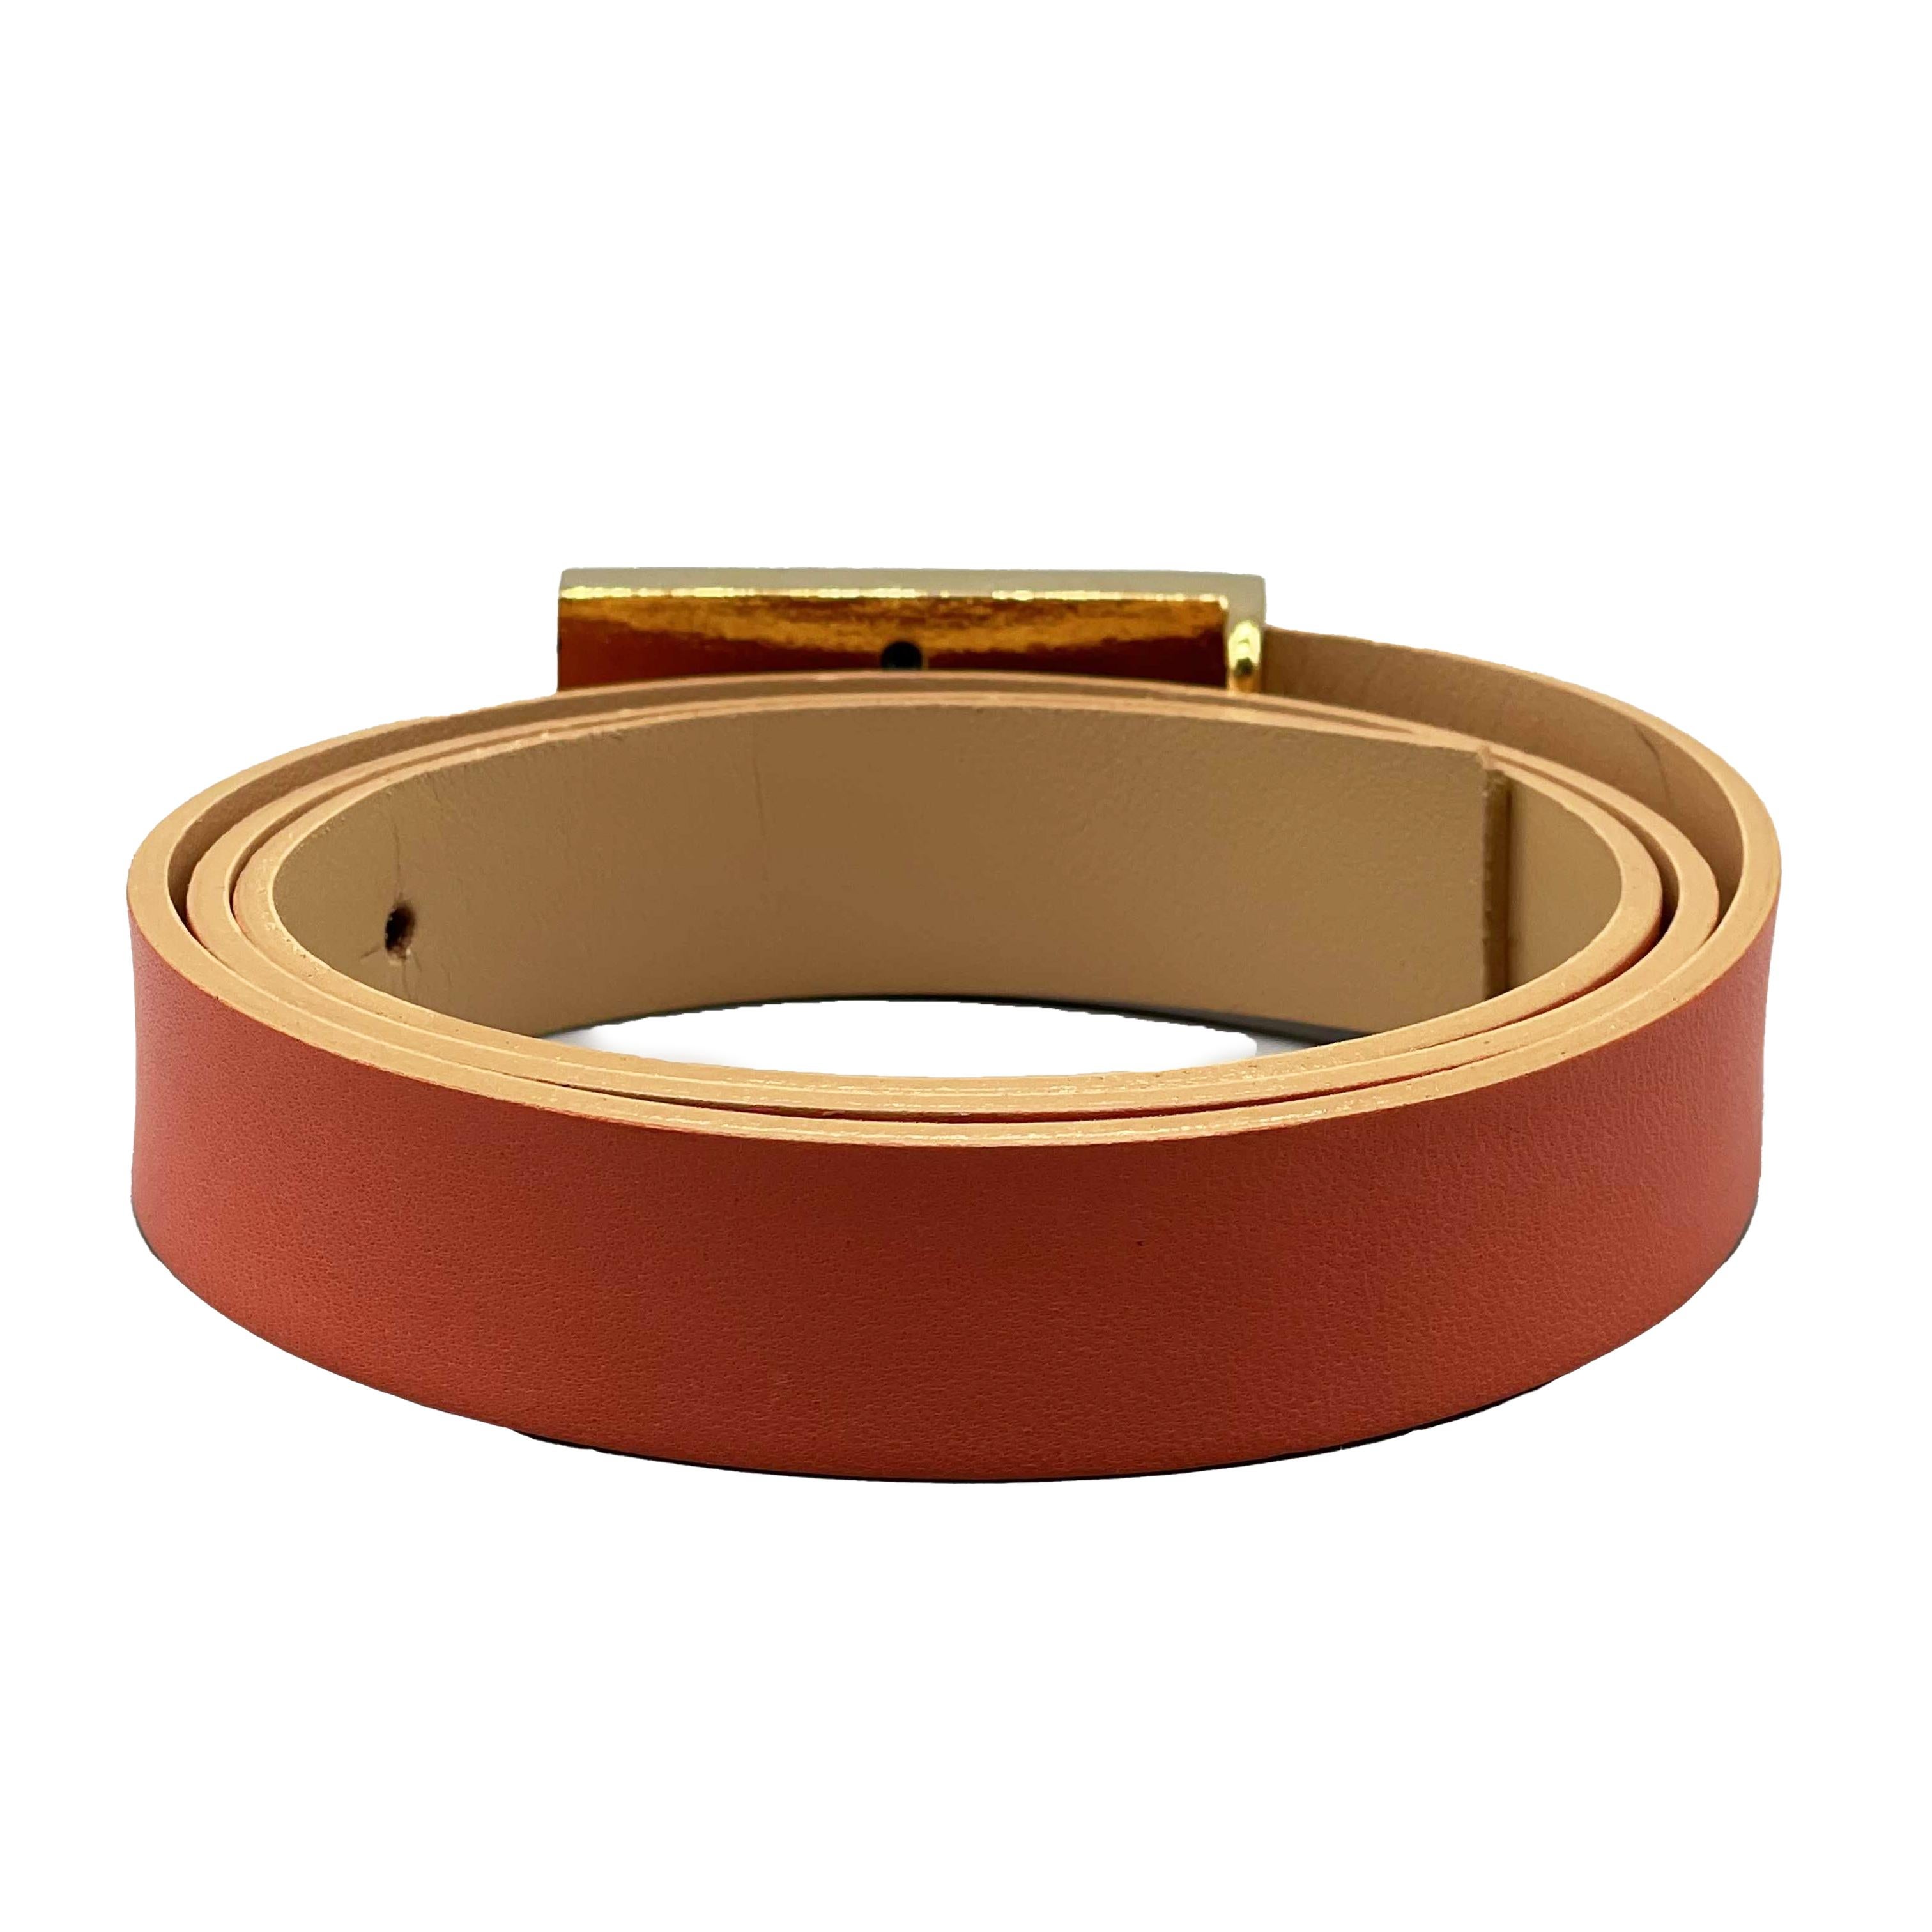 CHANEL - 01P 2001 Spring Vintage Leather Belt -Salmon / Gold 80 / 32

Description

From the 2001 Spring Collection.
This belt is crafted in a salmon colored leather.
